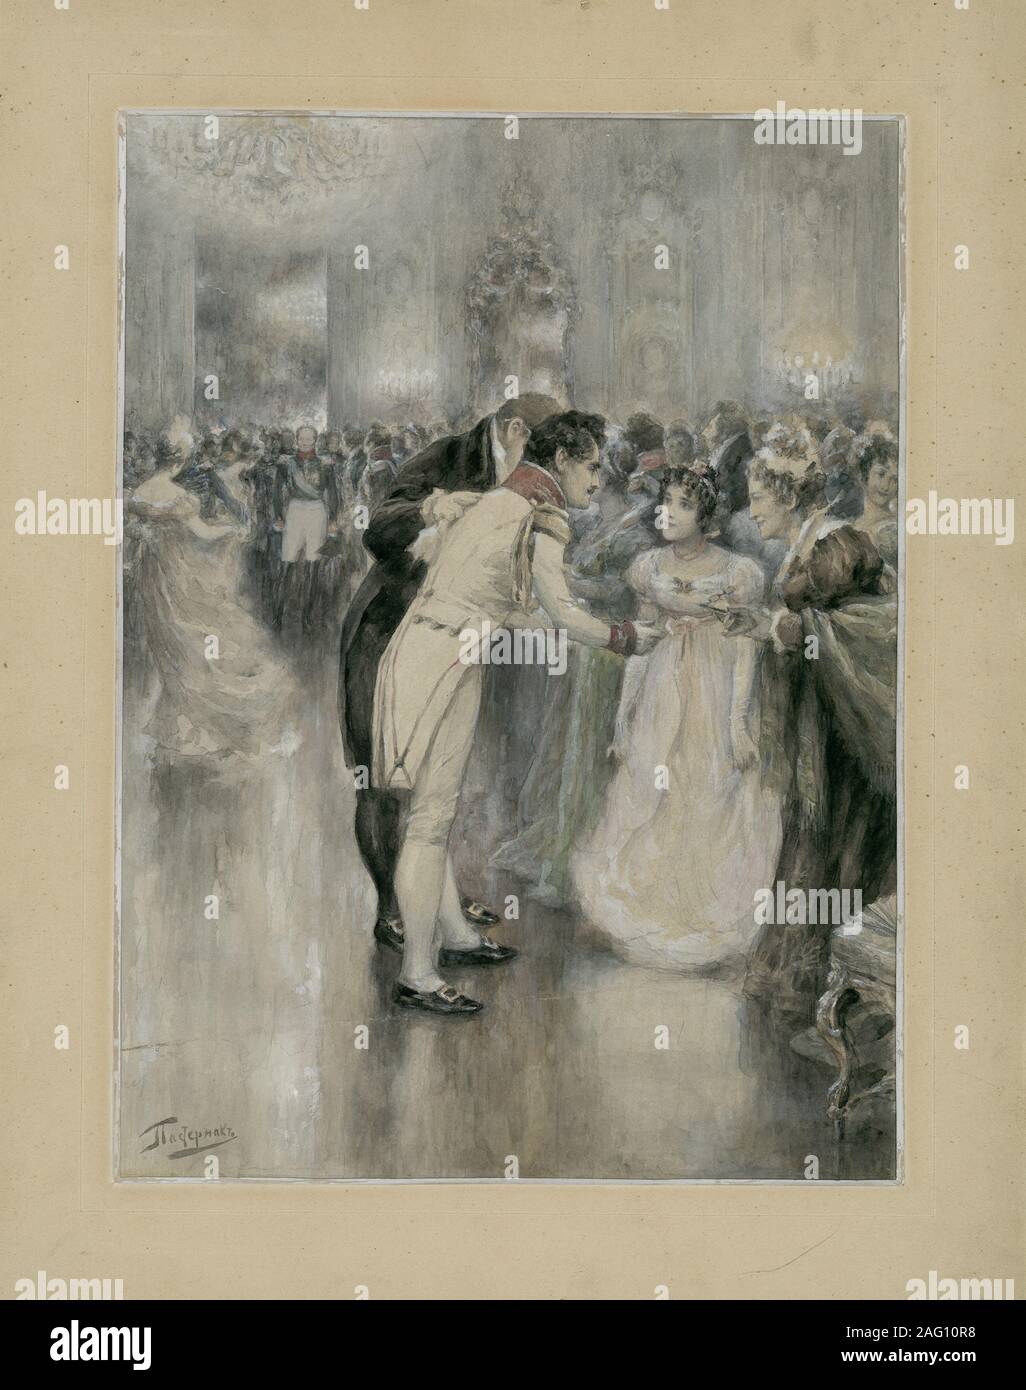 Natasha on her first ball. Illustration for the novel War and Peace by Leo Tolstoy, 1893. Found in the Collection of State Museum of Leo Tolstoy, Moscow. Stock Photo